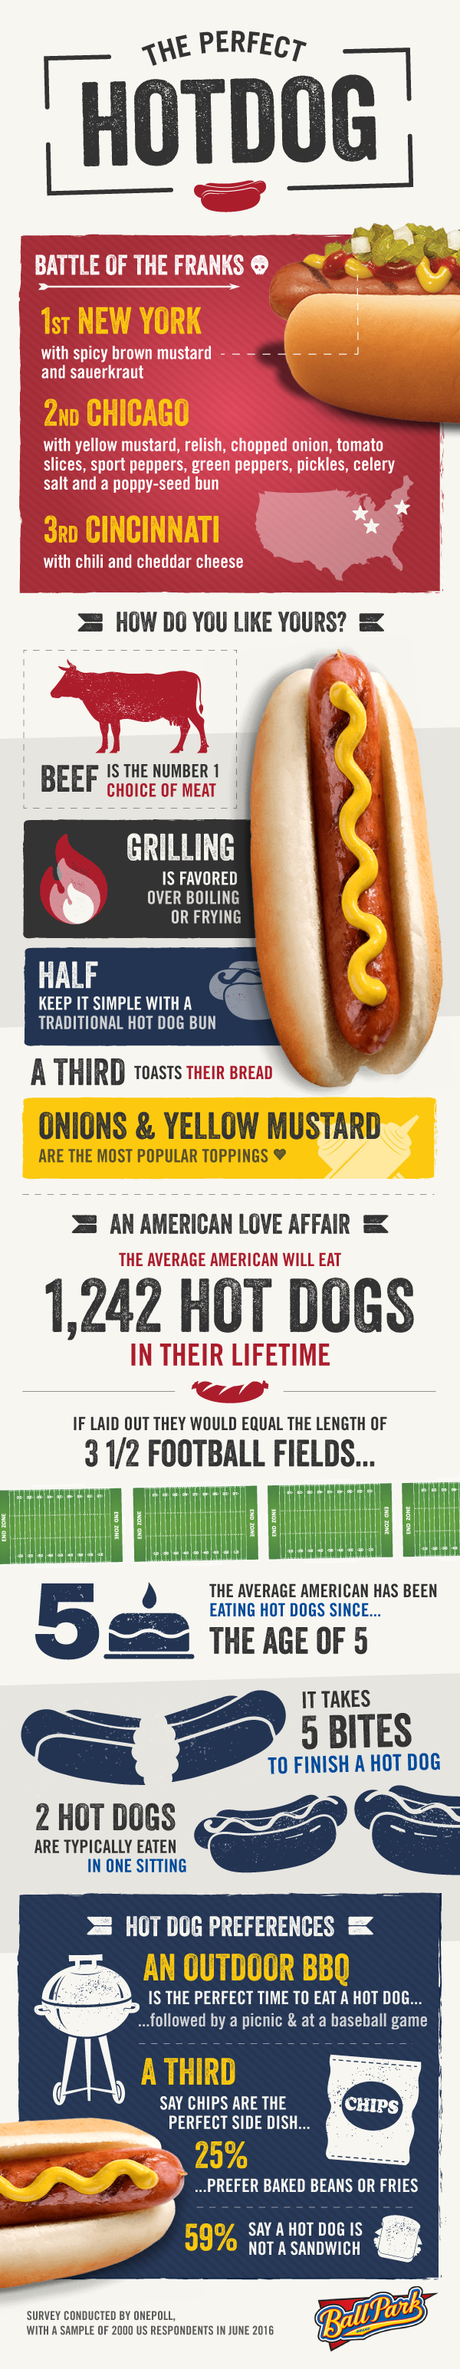 It’s National Hot Dog Day – America’s perfect hots dog revealed